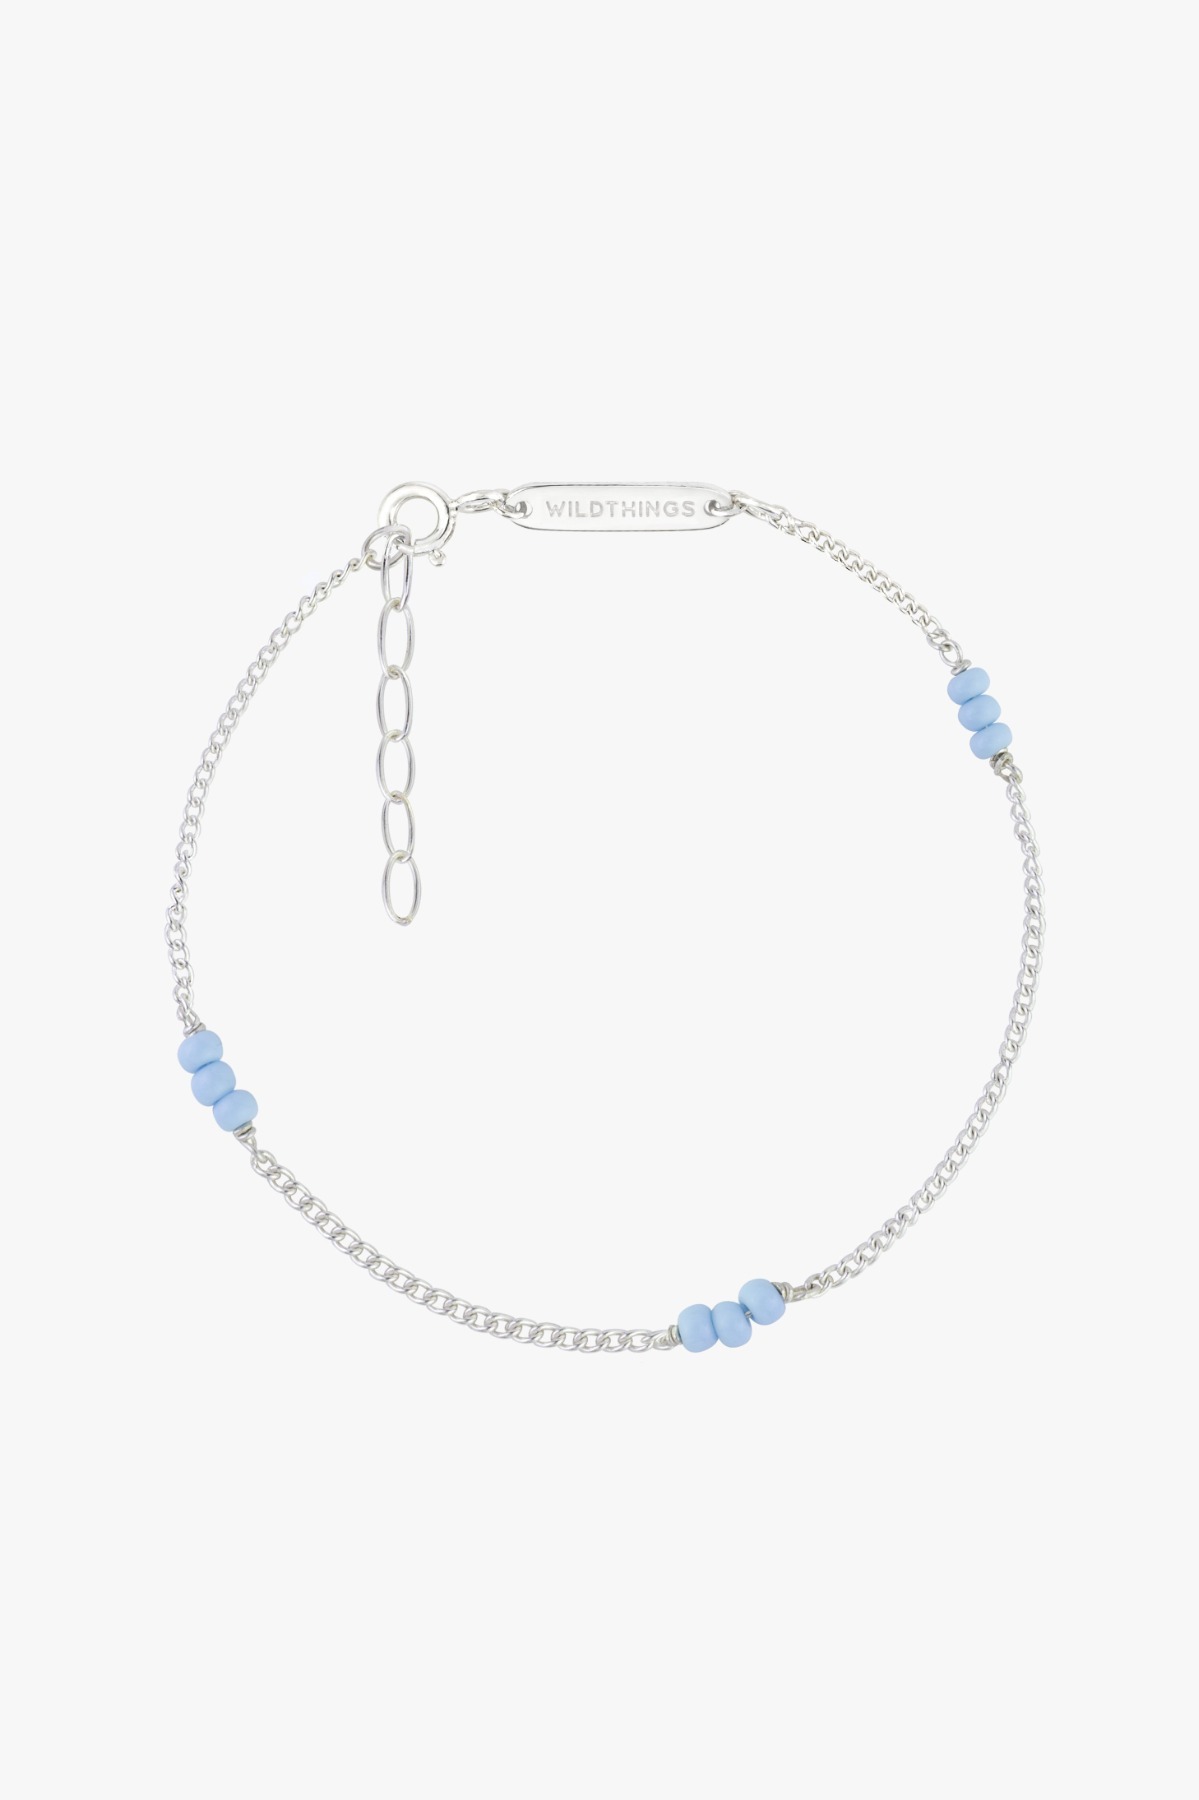 wildthings collectables - Triple blue beads bracelet silver